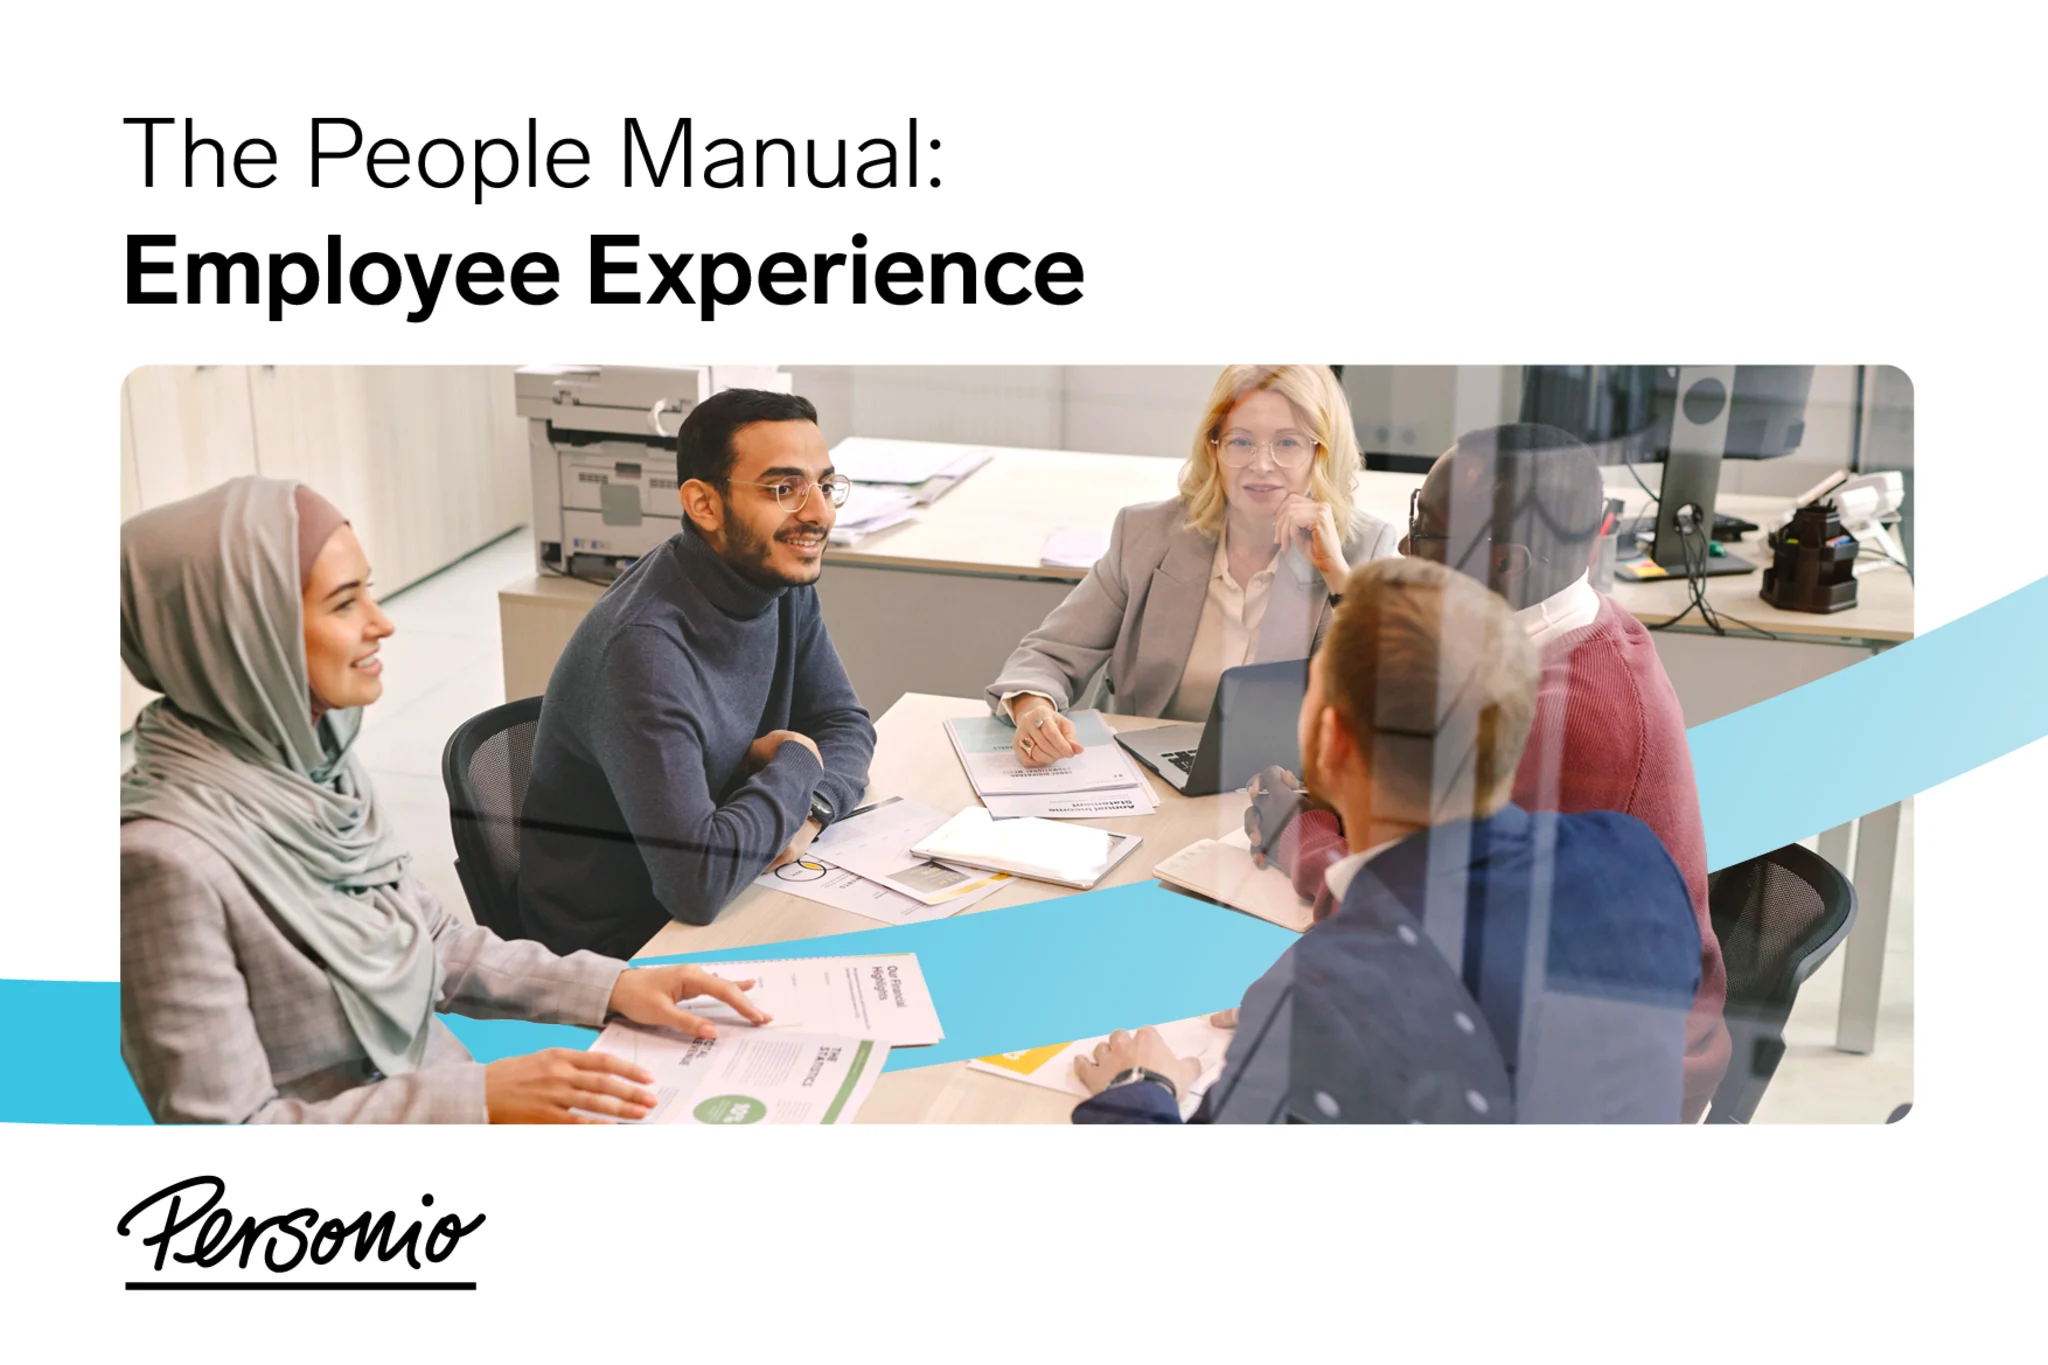 The People Manual: Employee Experience